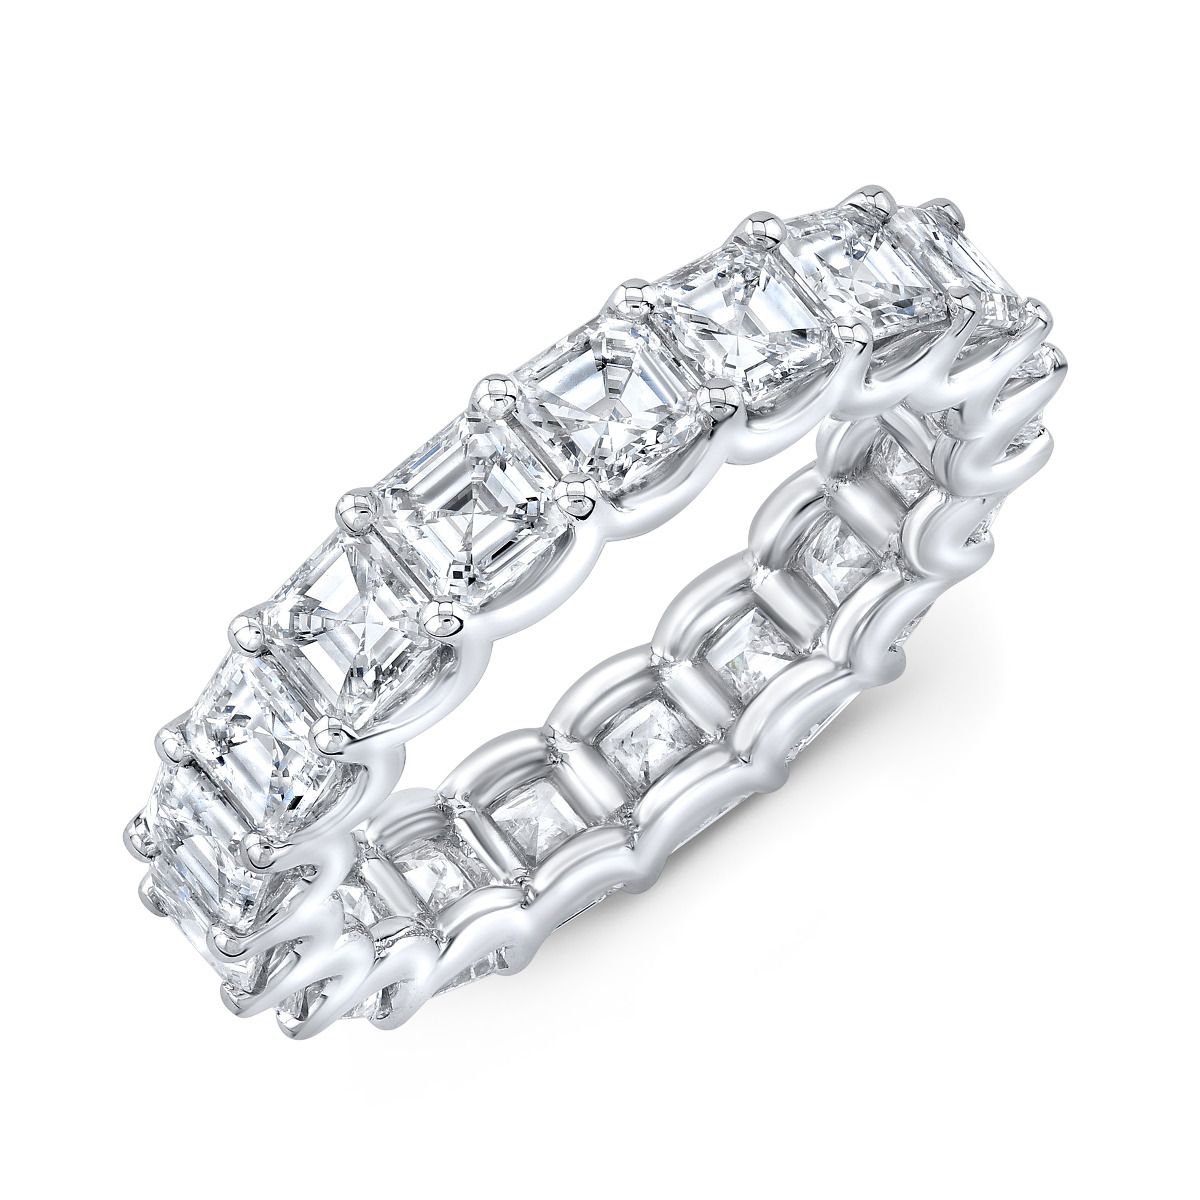 Also available in Solid White, Yellow or Rose Gold (14K or 18K) & Platinum this Asscher Cut Diamond Eternity Wedding Band ring is a MUST HAVE